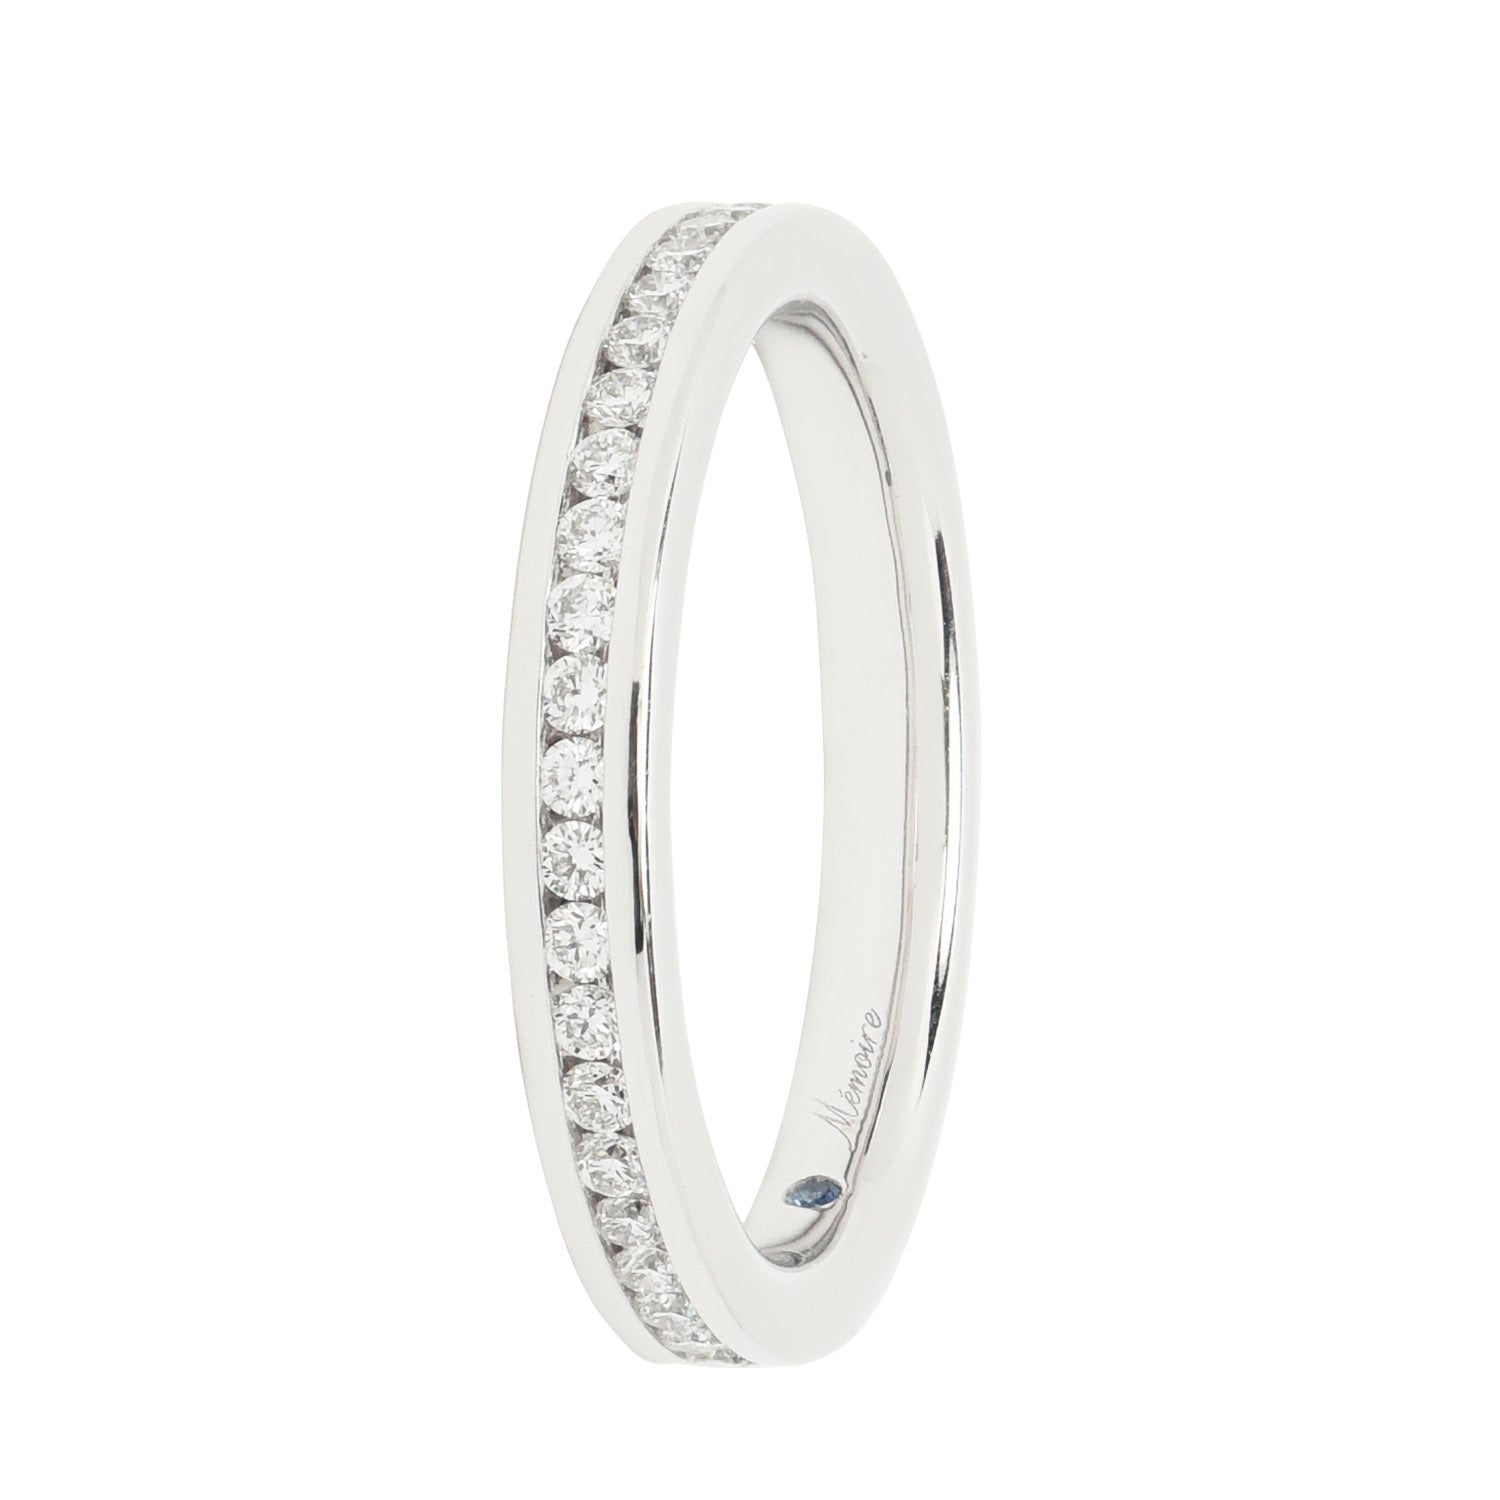 Memoire Channel Set Diamond Eternity Band in 18kt White Gold (3/8ct tw Size 5.5)